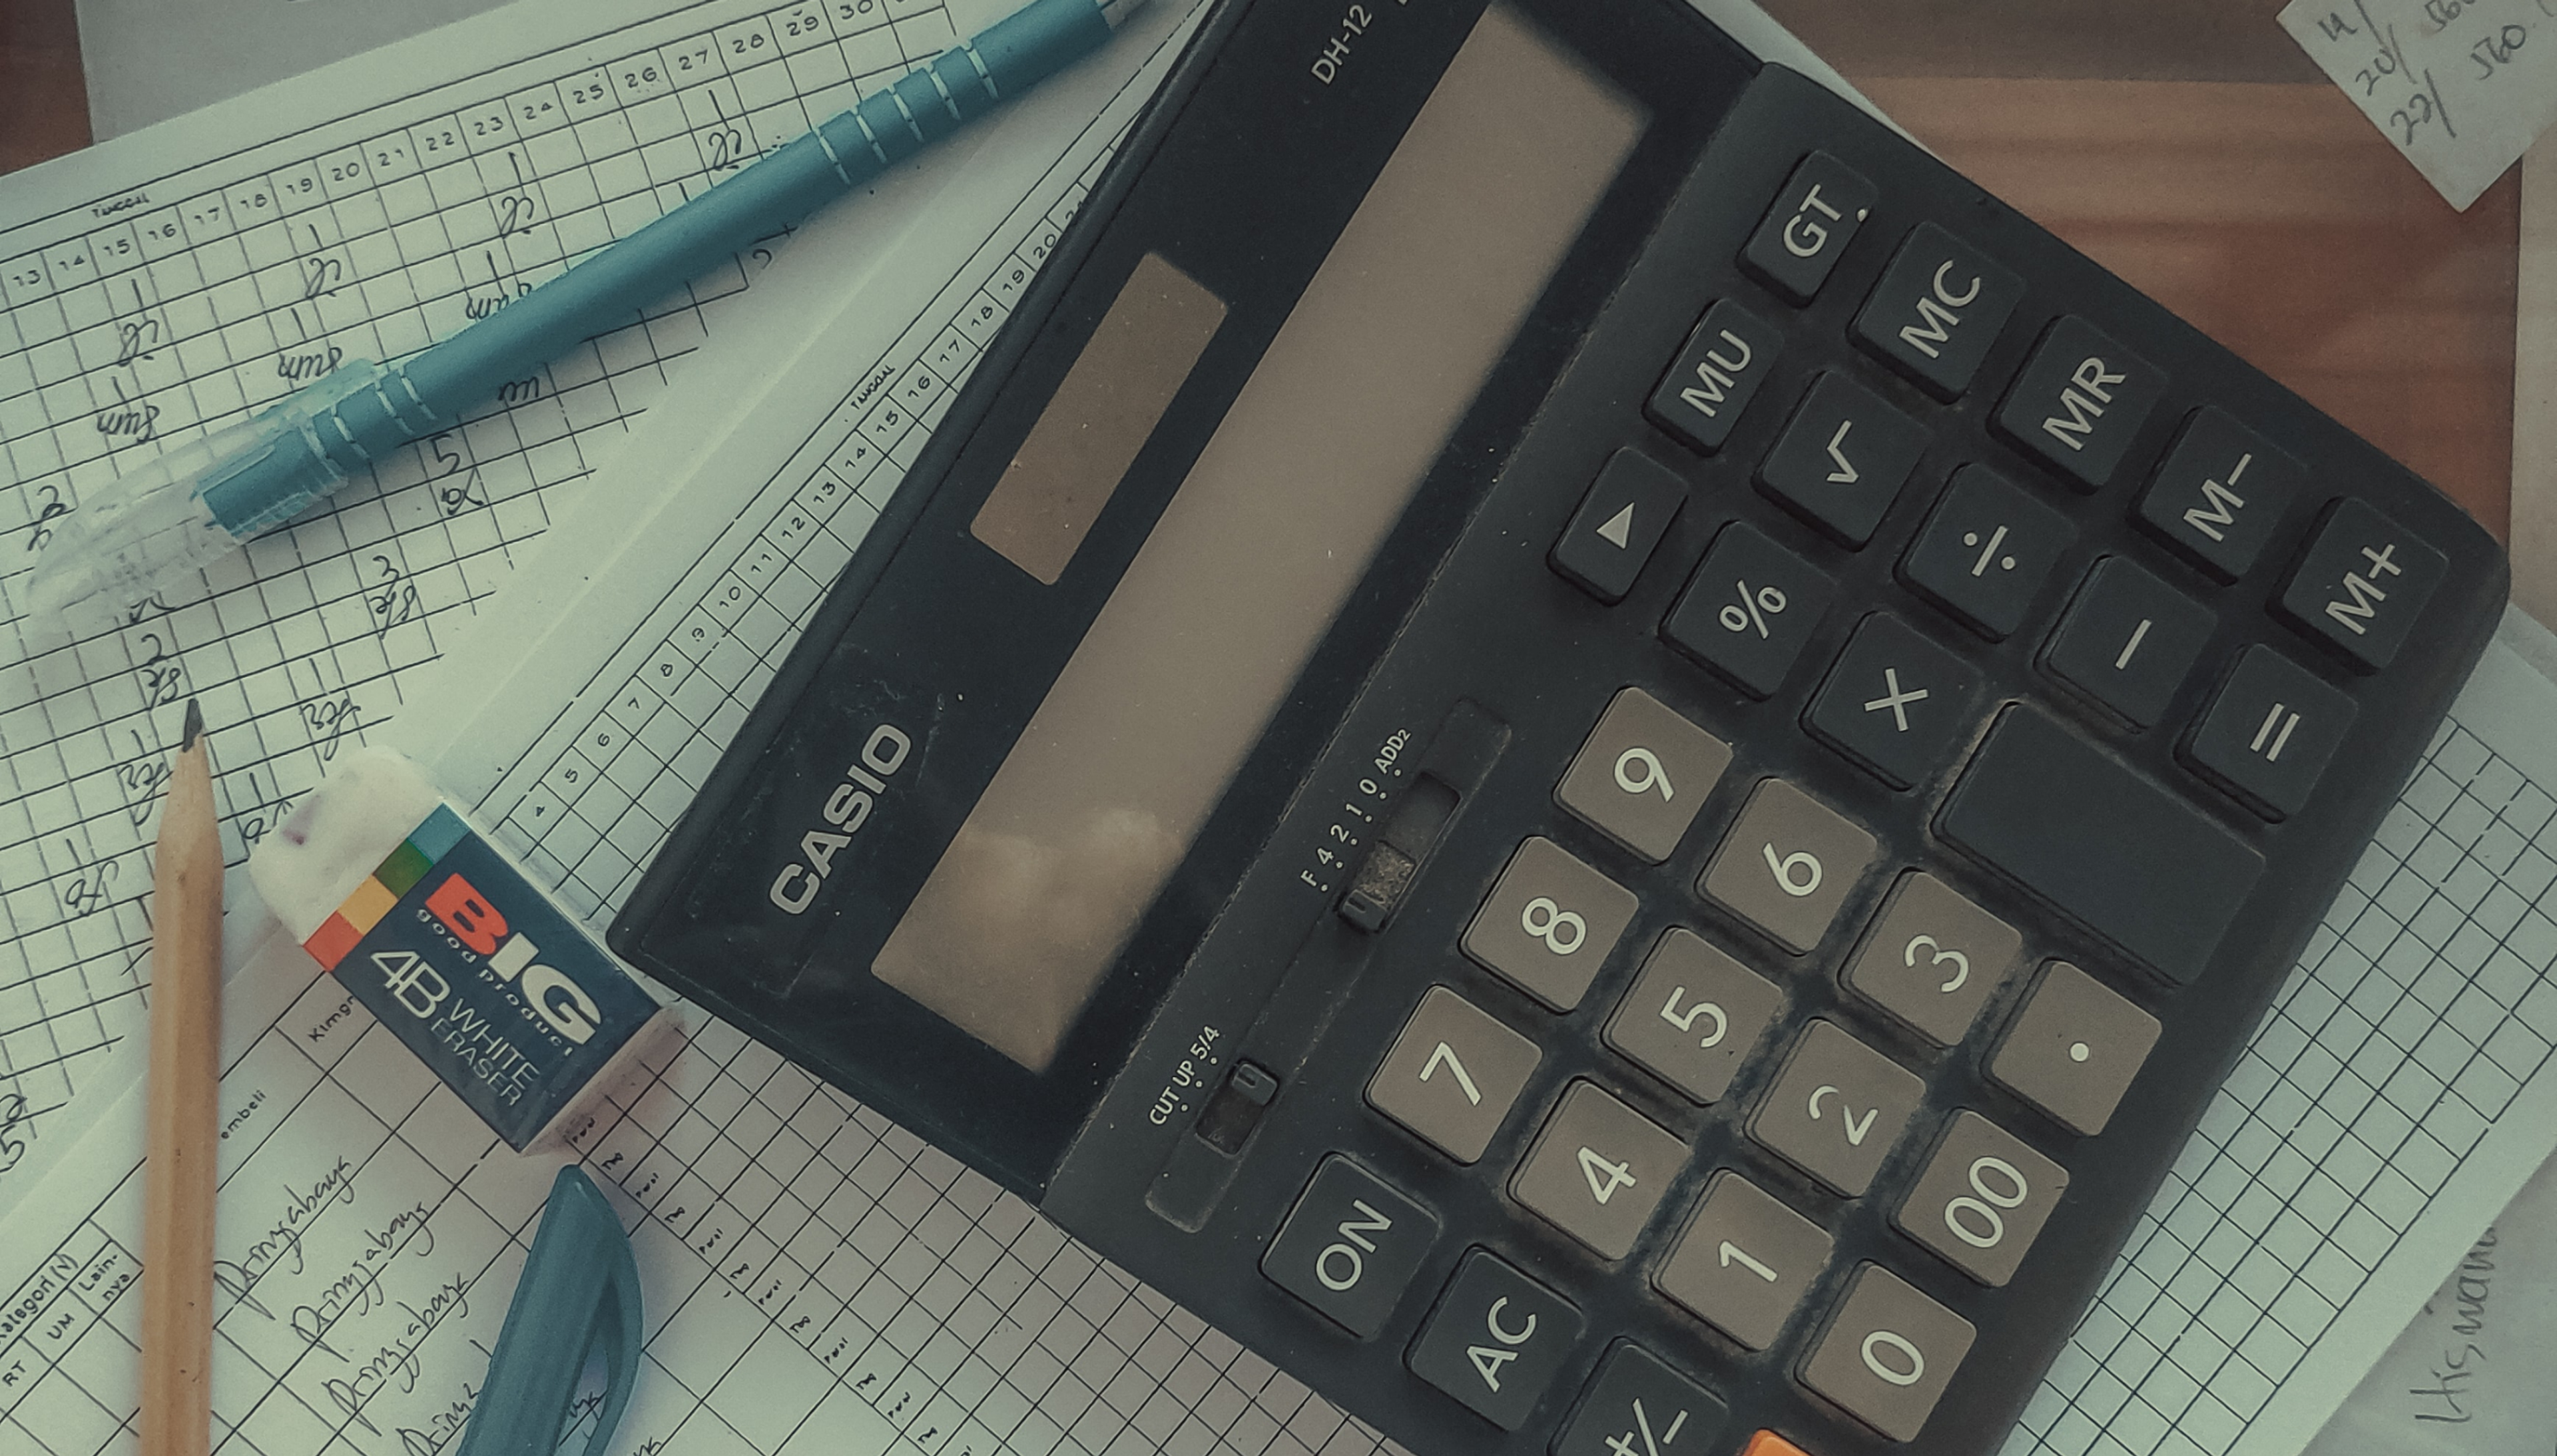 An image of a calculator and math supplies